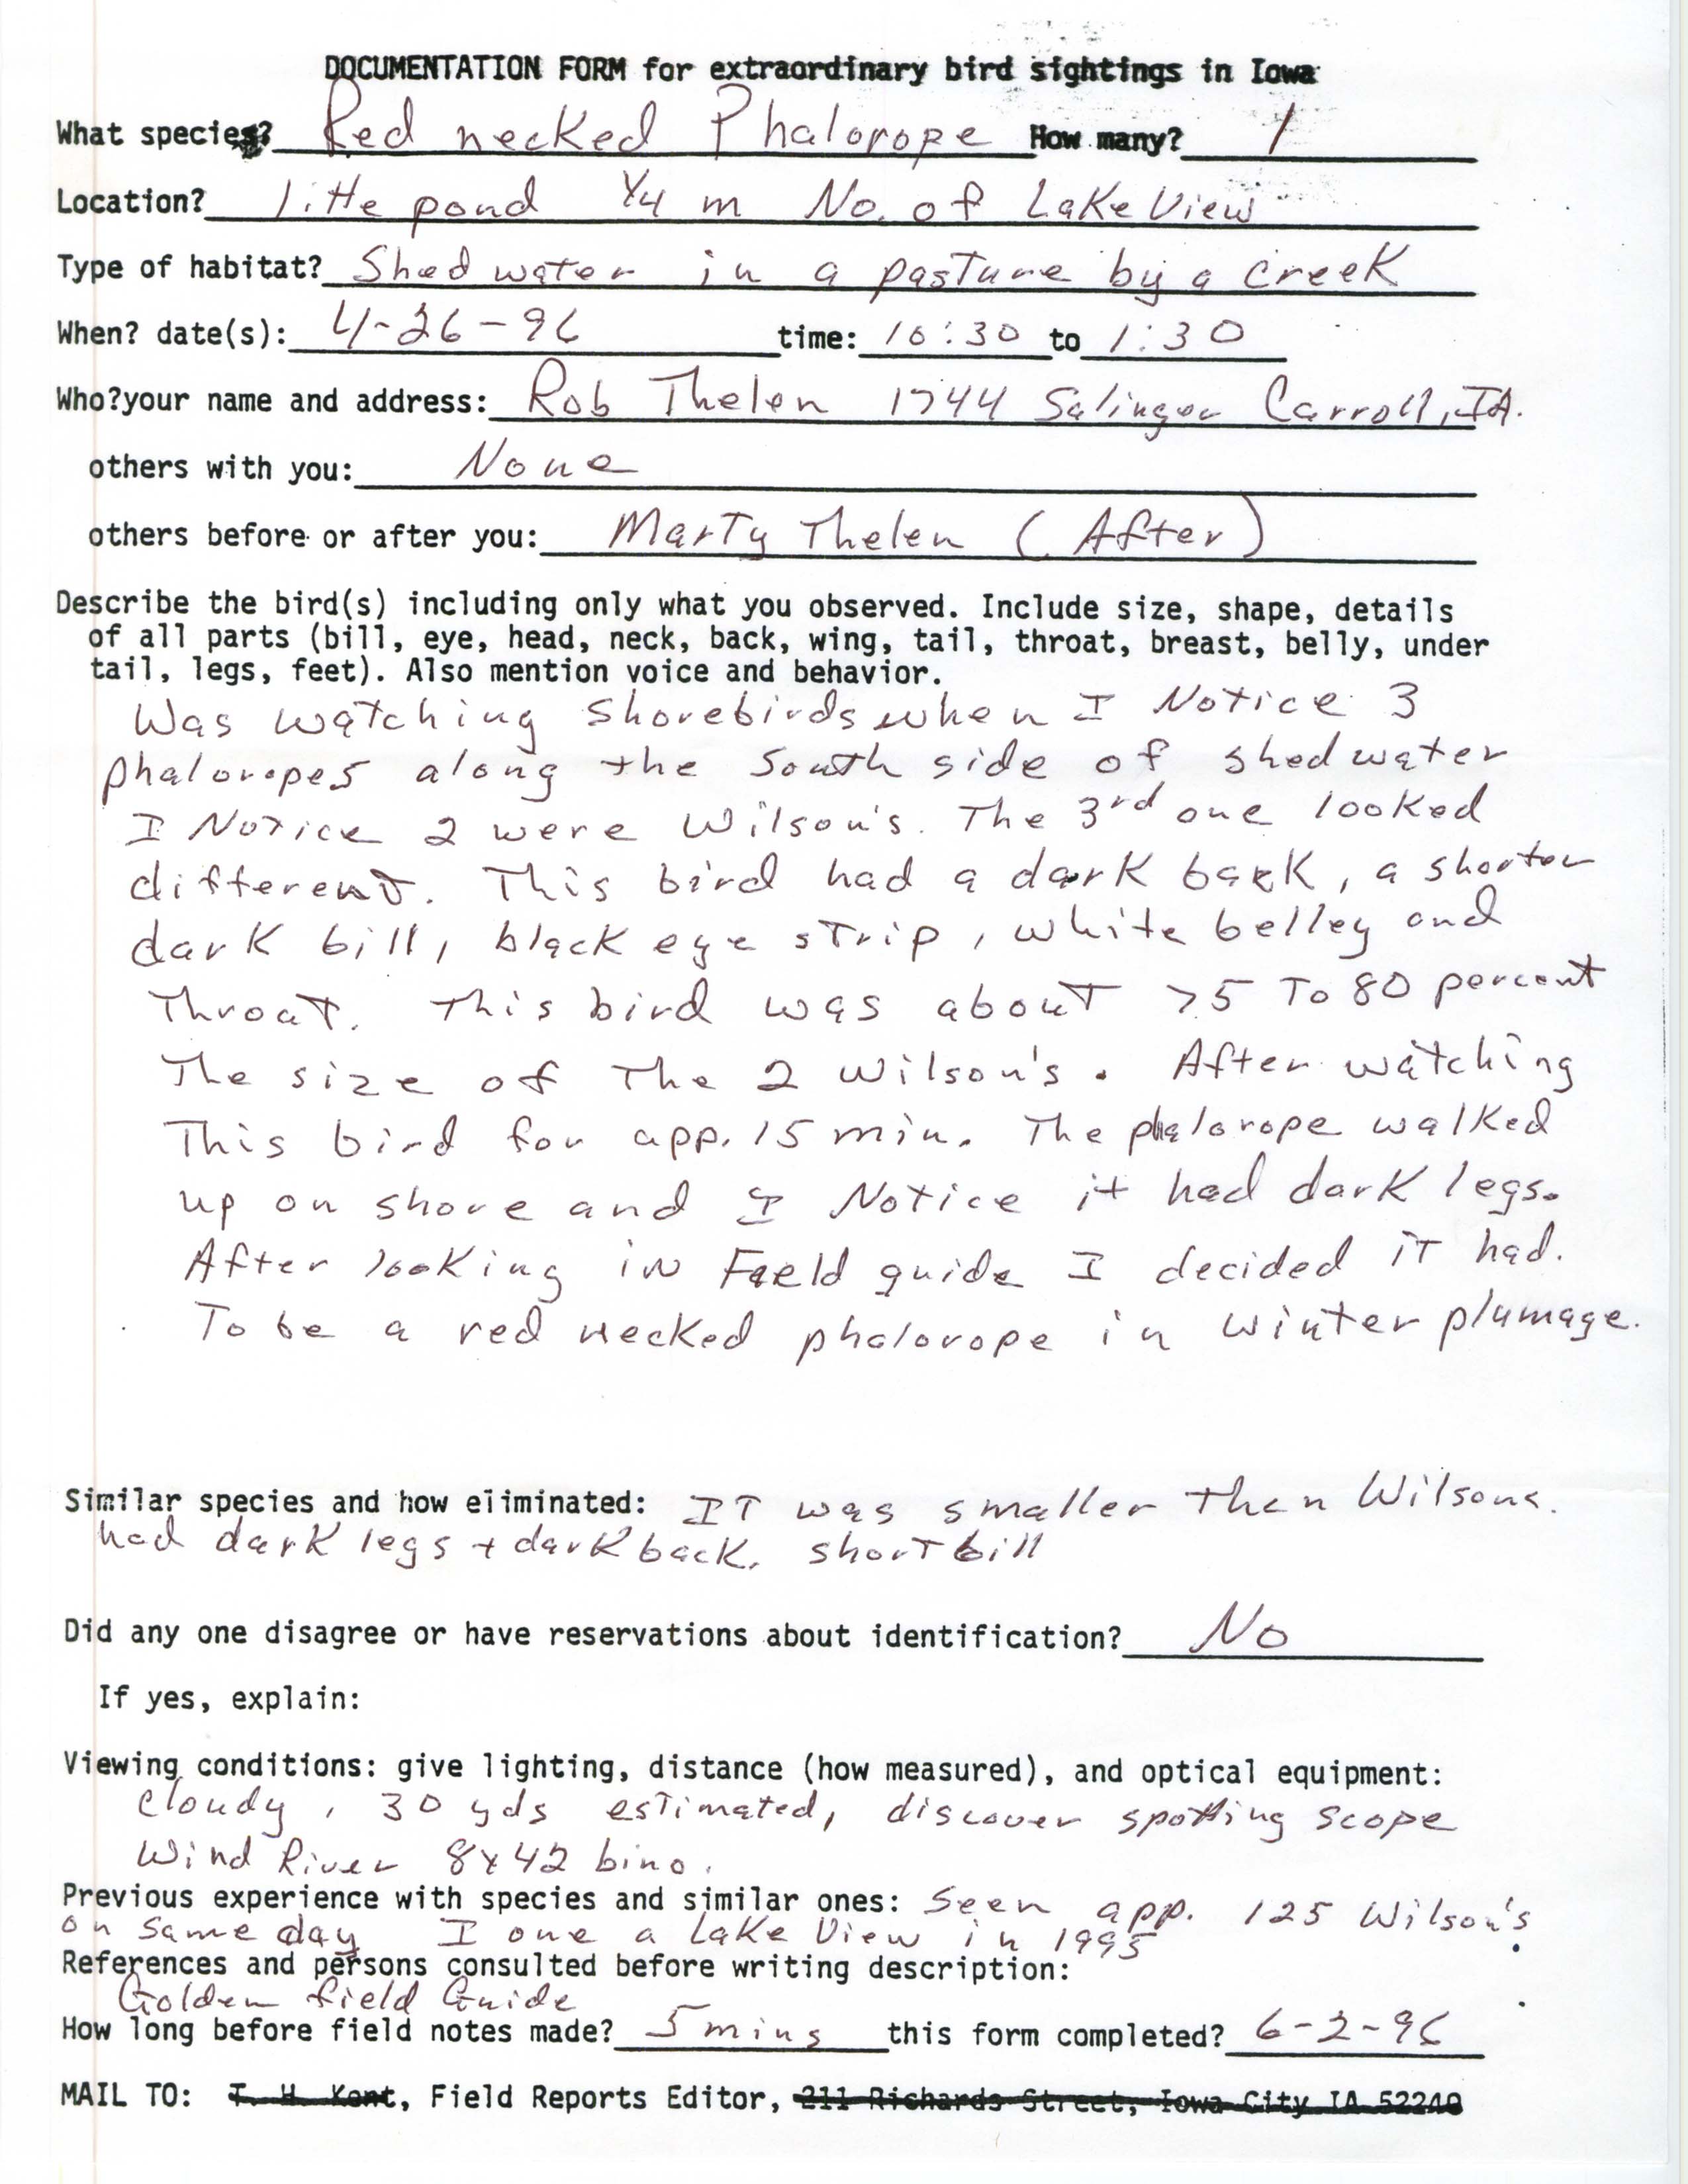 Rare bird documentation form for Red-necked Phalarope north of Lake View, 1996